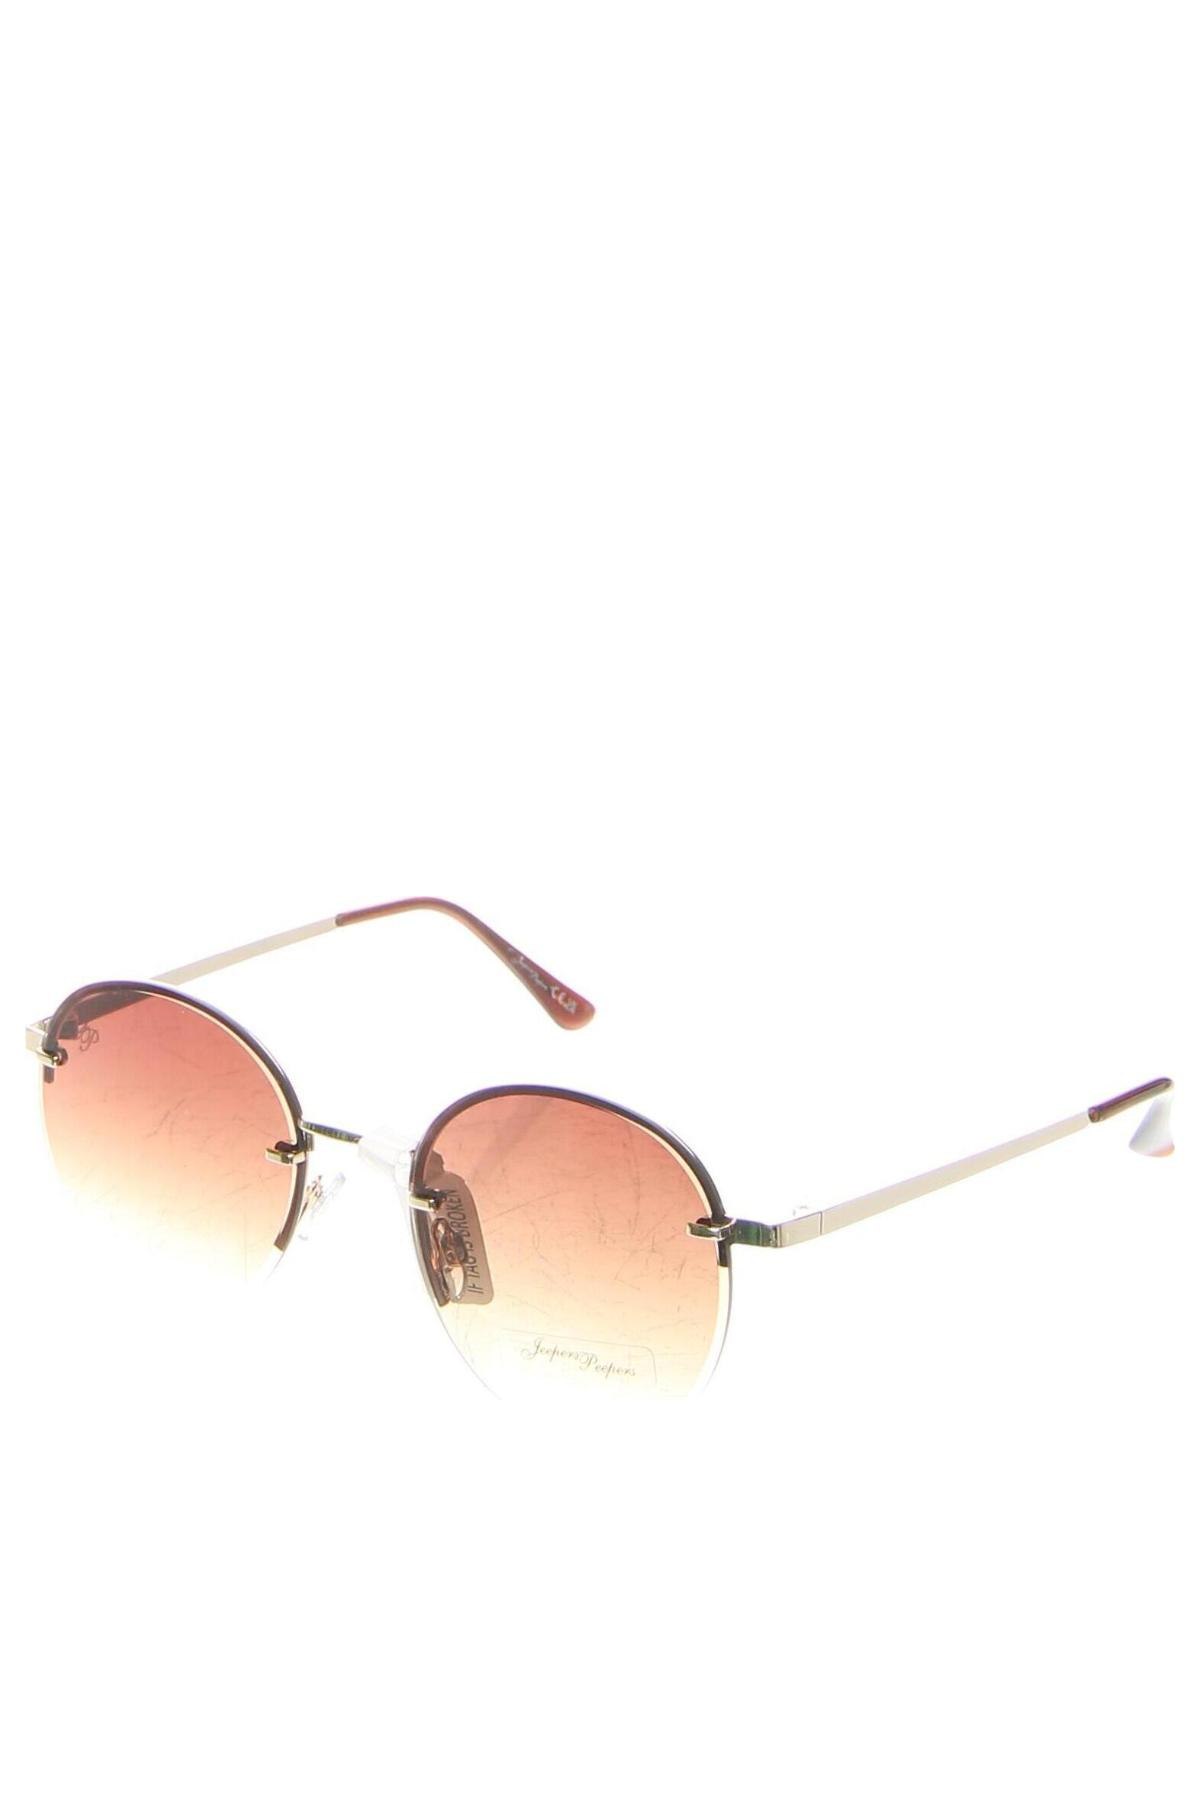 Sonnenbrille Jeepers Peepers, Farbe Braun, Preis € 37,11